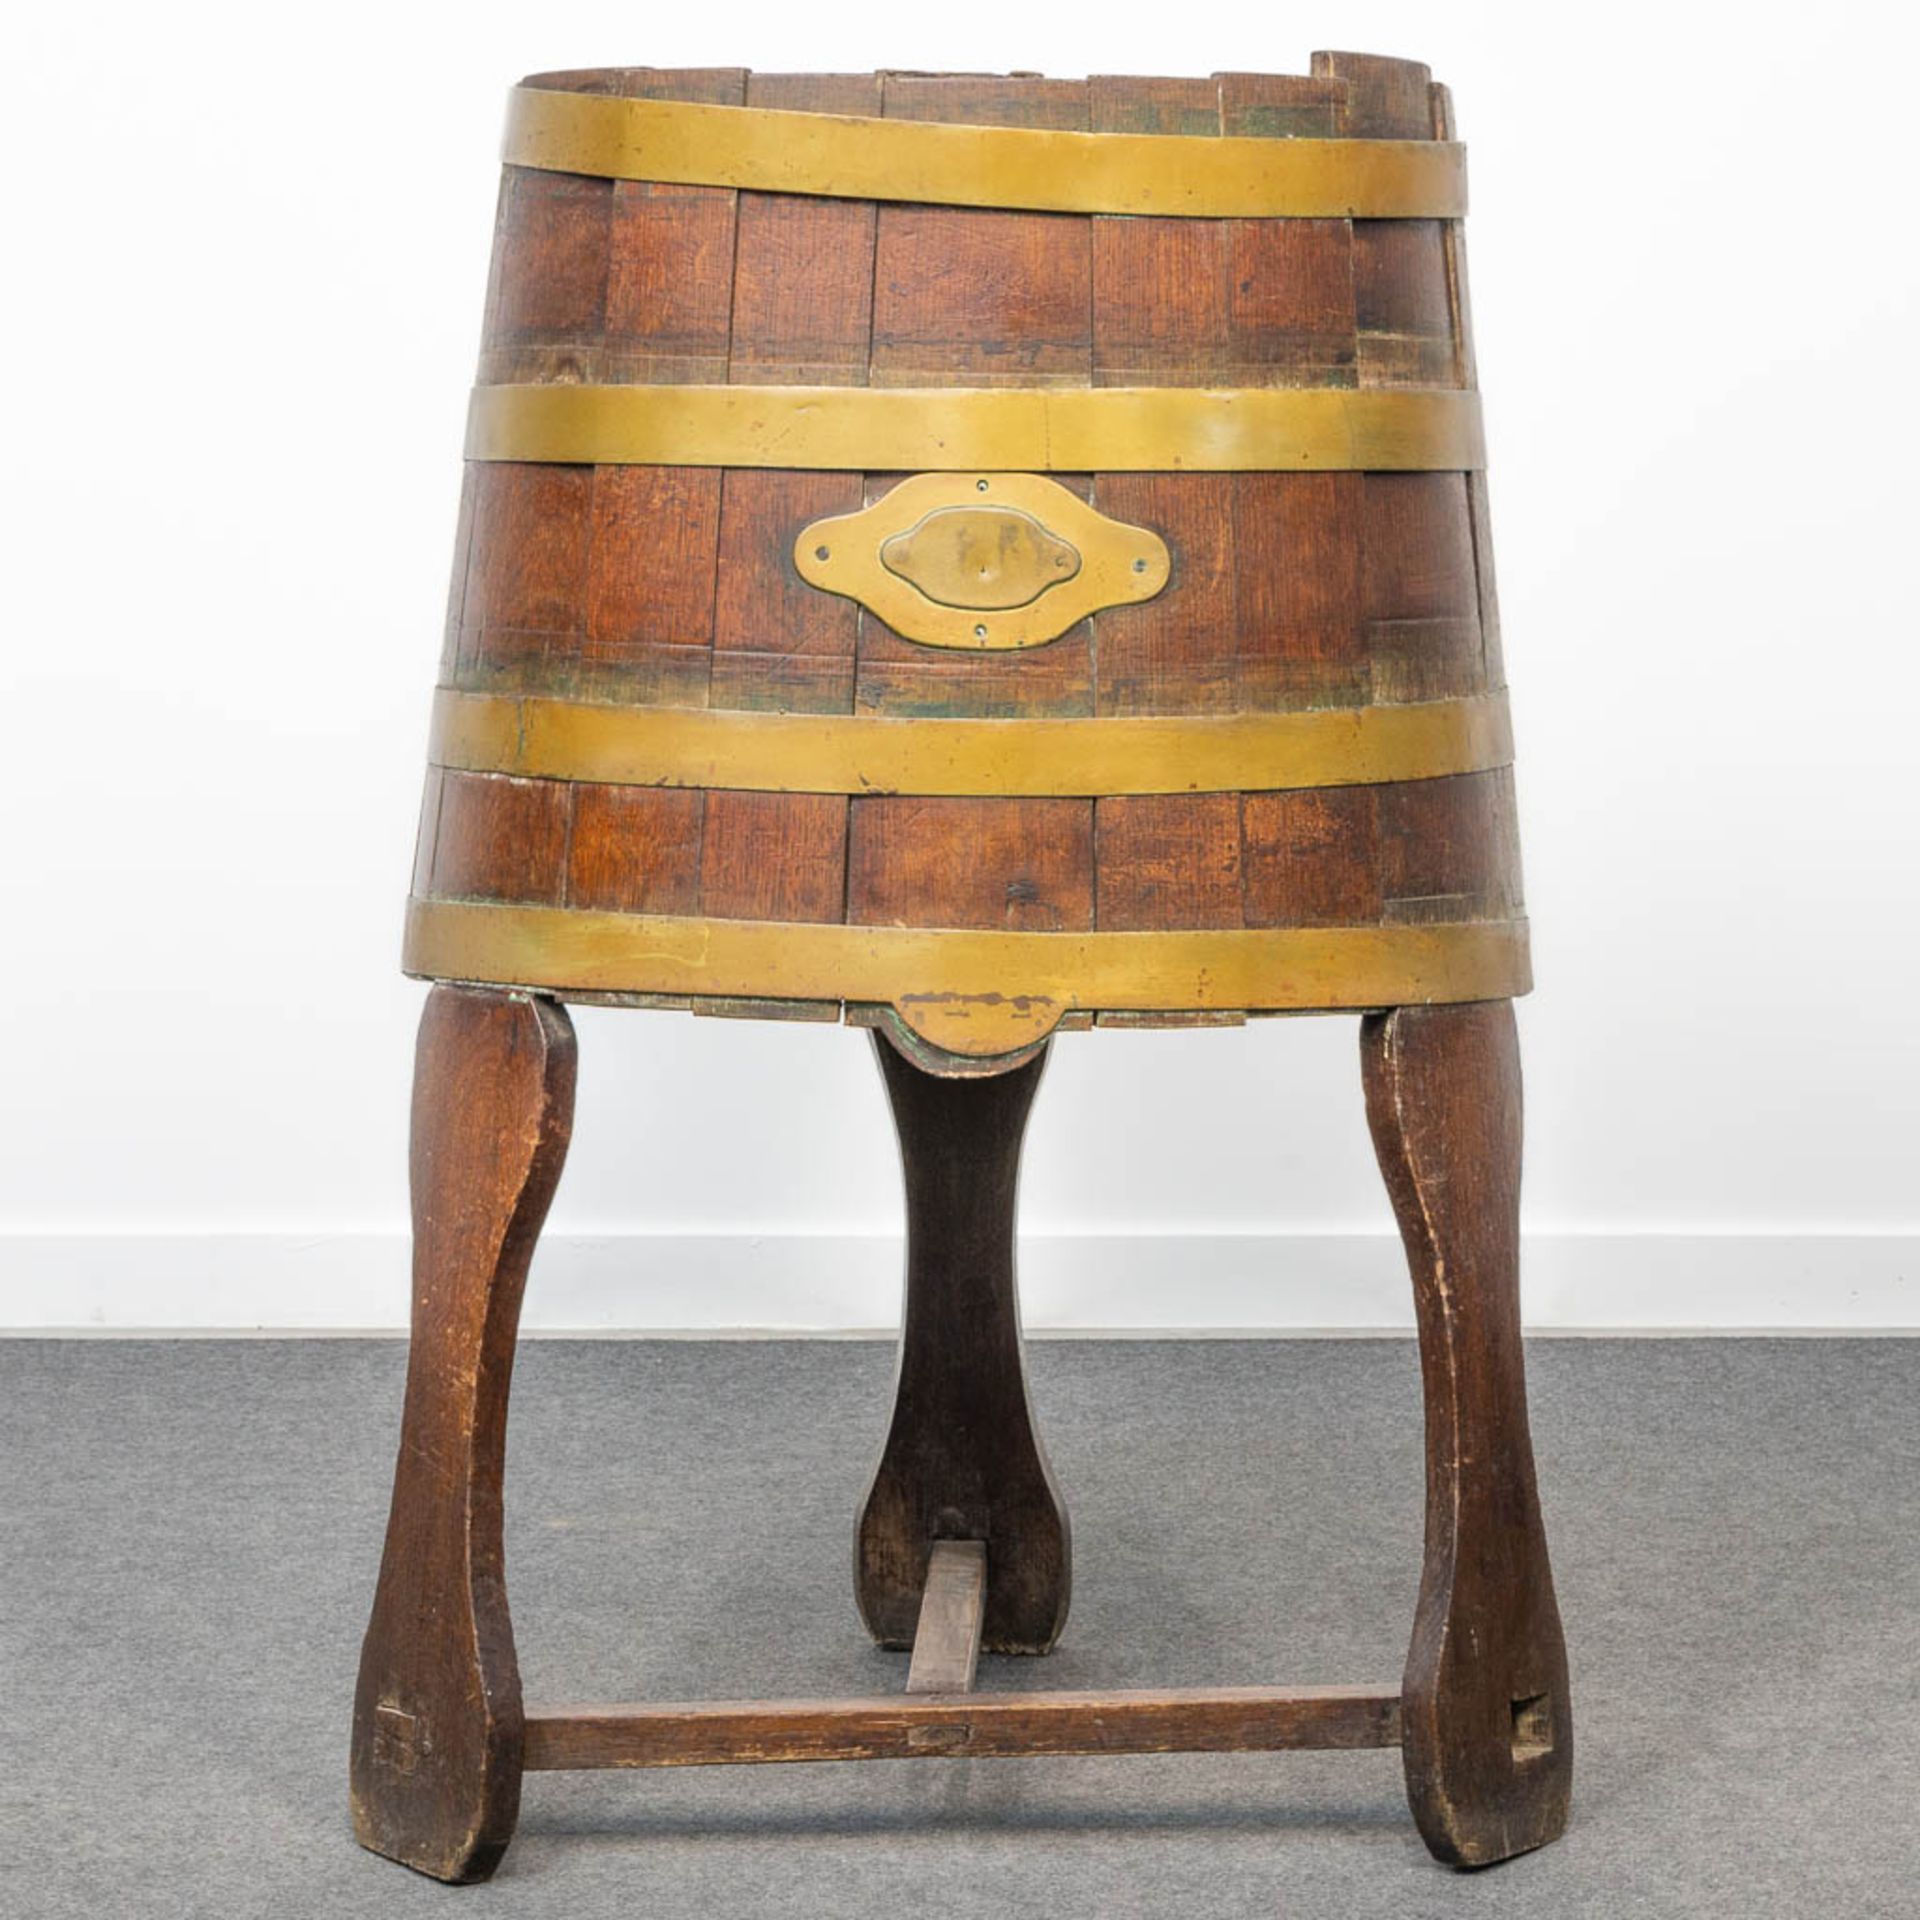 A churn standing on a base, made of oak and brass. (61 x 51 x 105 cm)